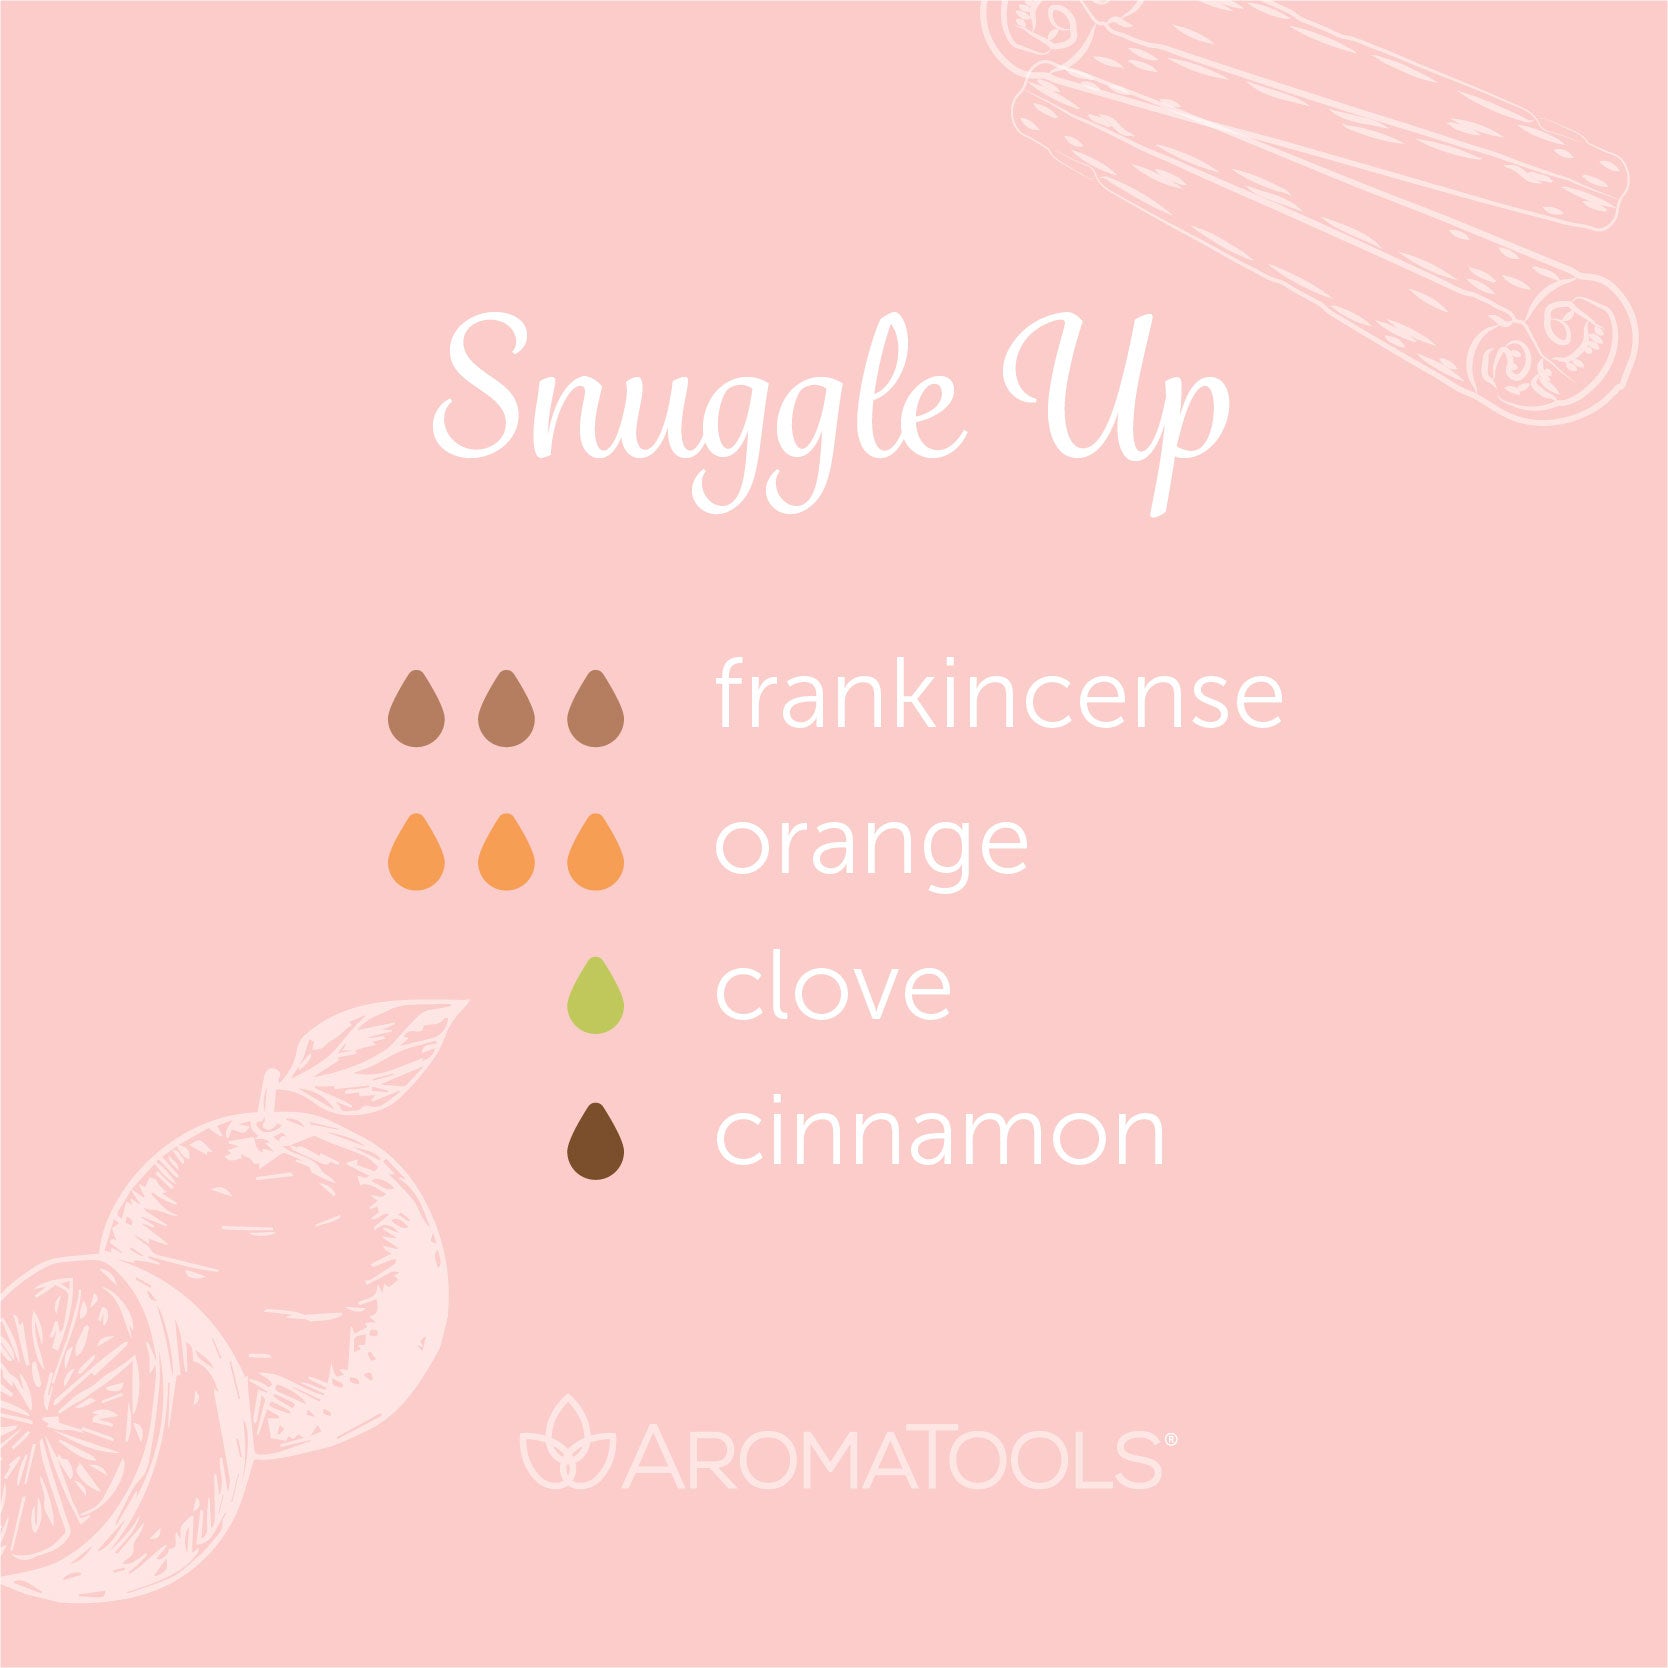 "Snuggle Up" Diffuser Blend. Features frankincense, orange, clove and cinnamon essential oils.